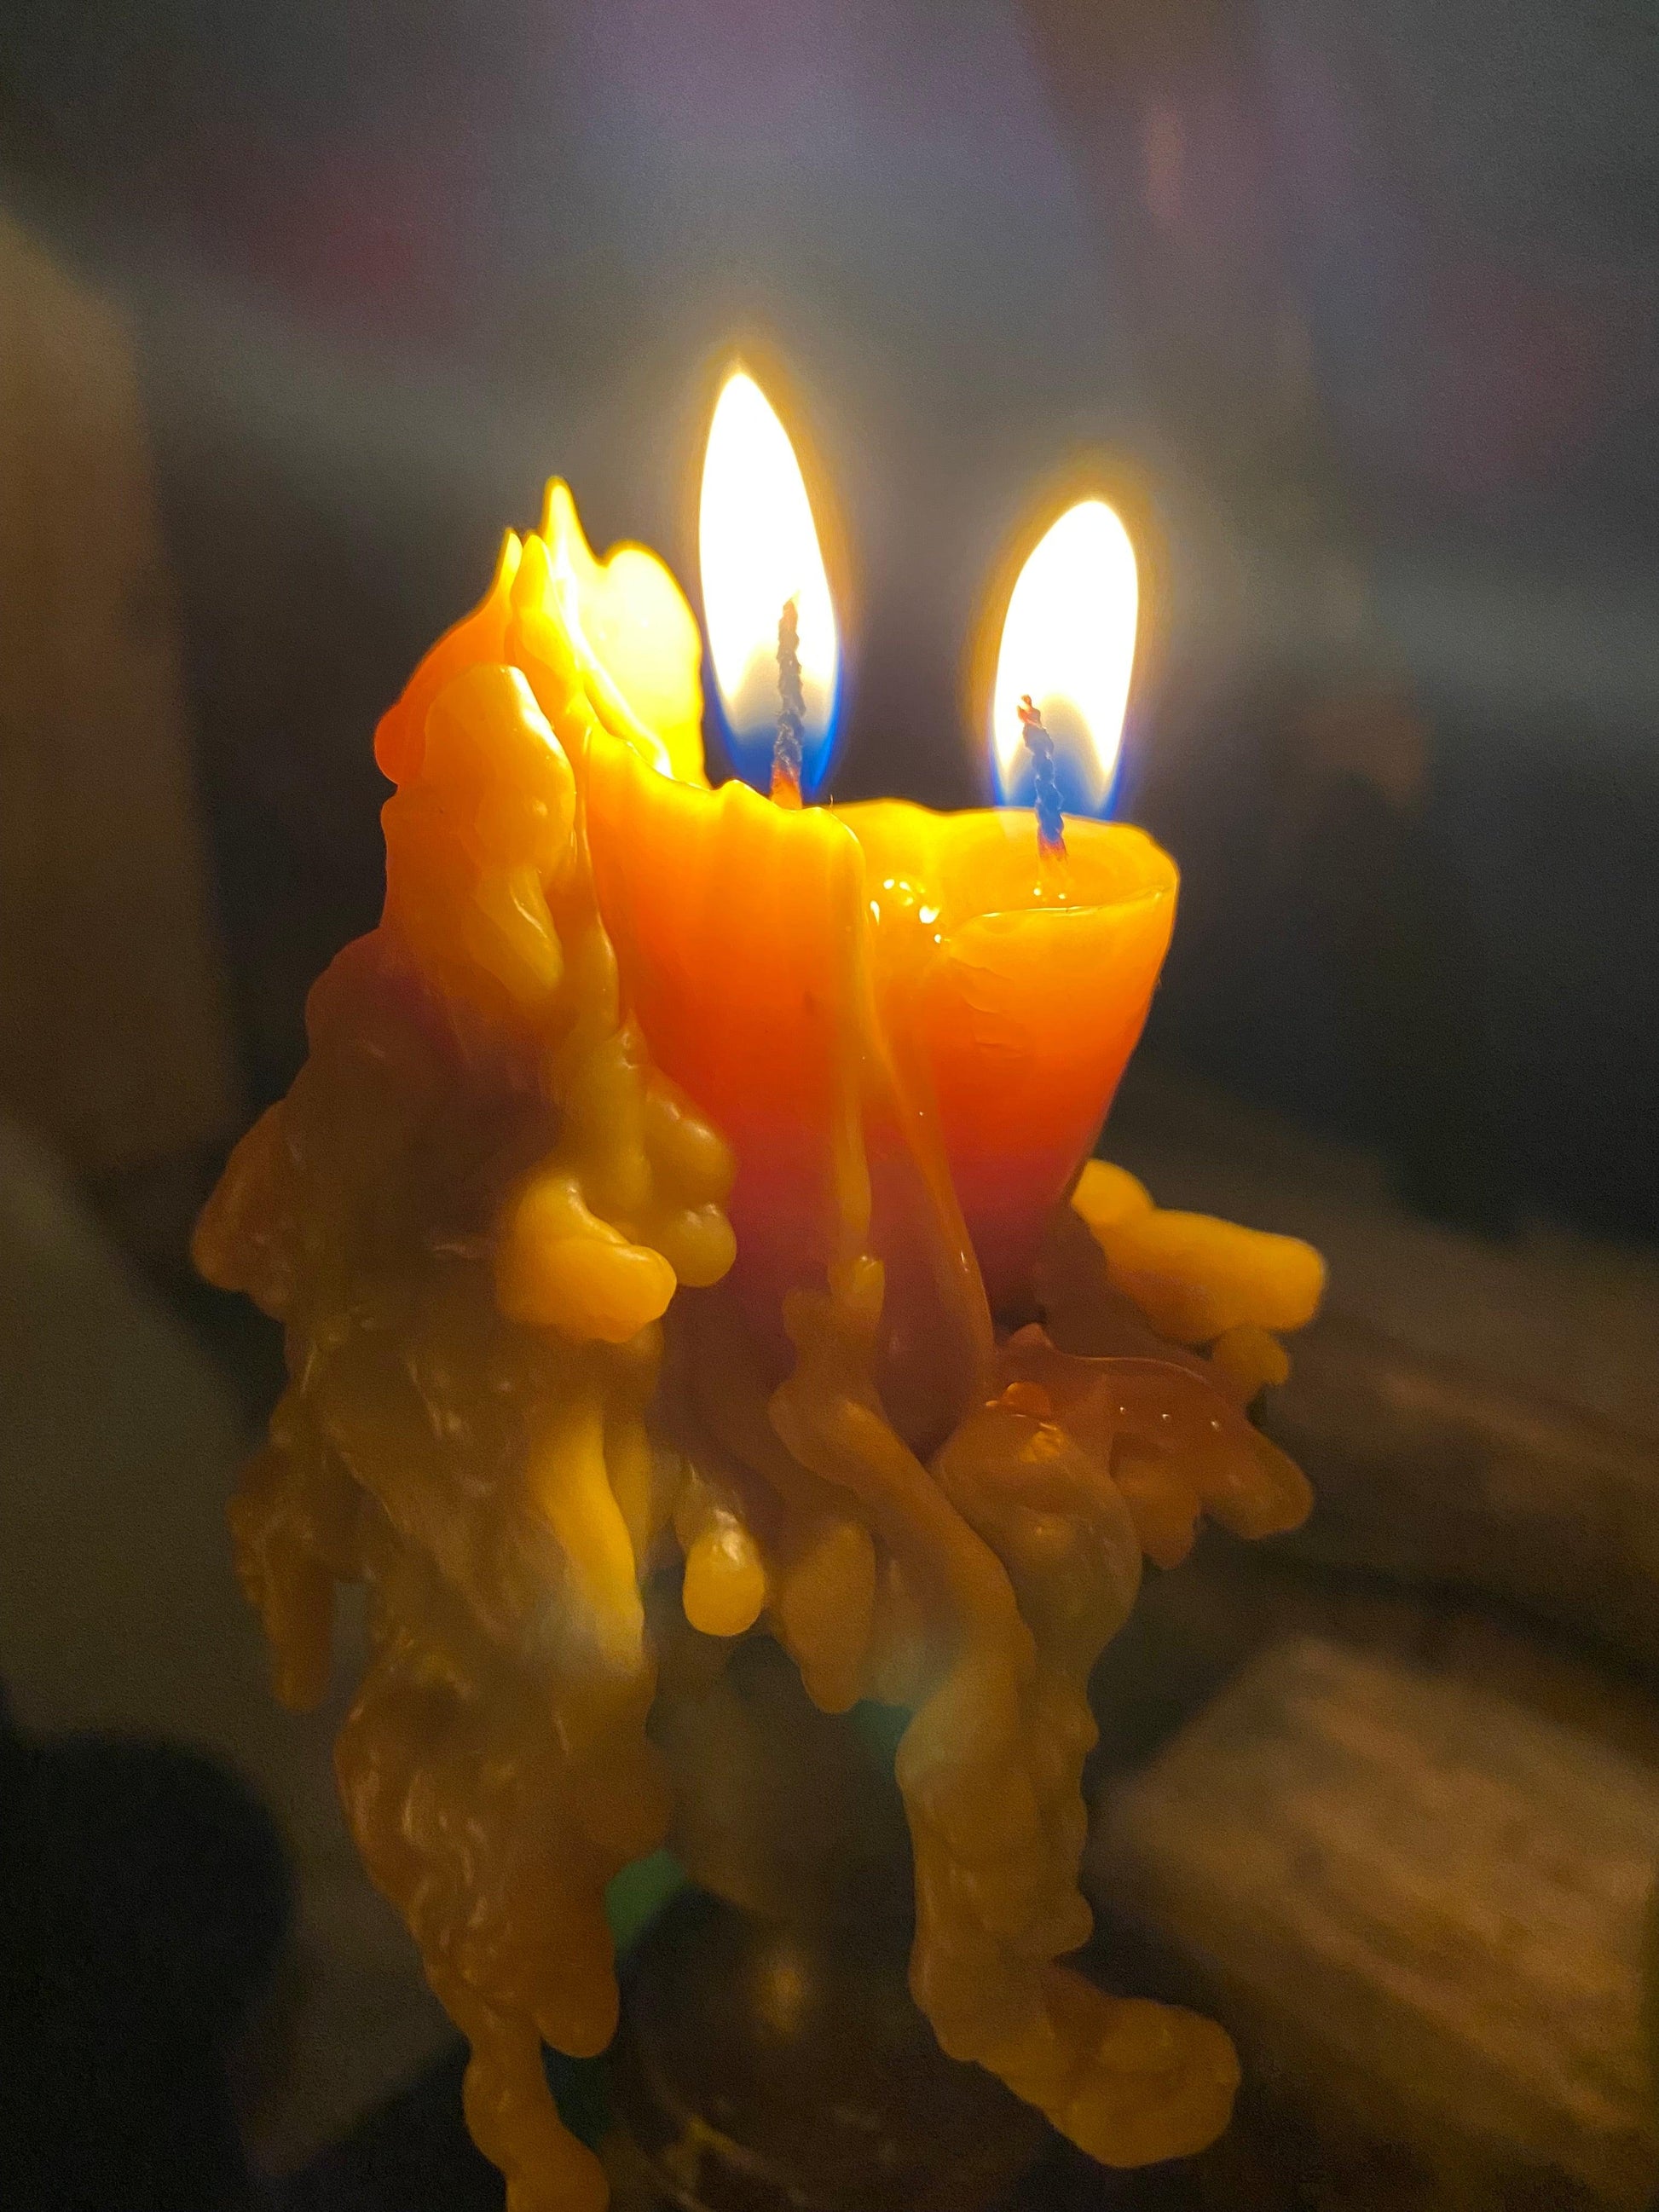 How To Make Homemade Beeswax Candles - Stay at Home Sarah